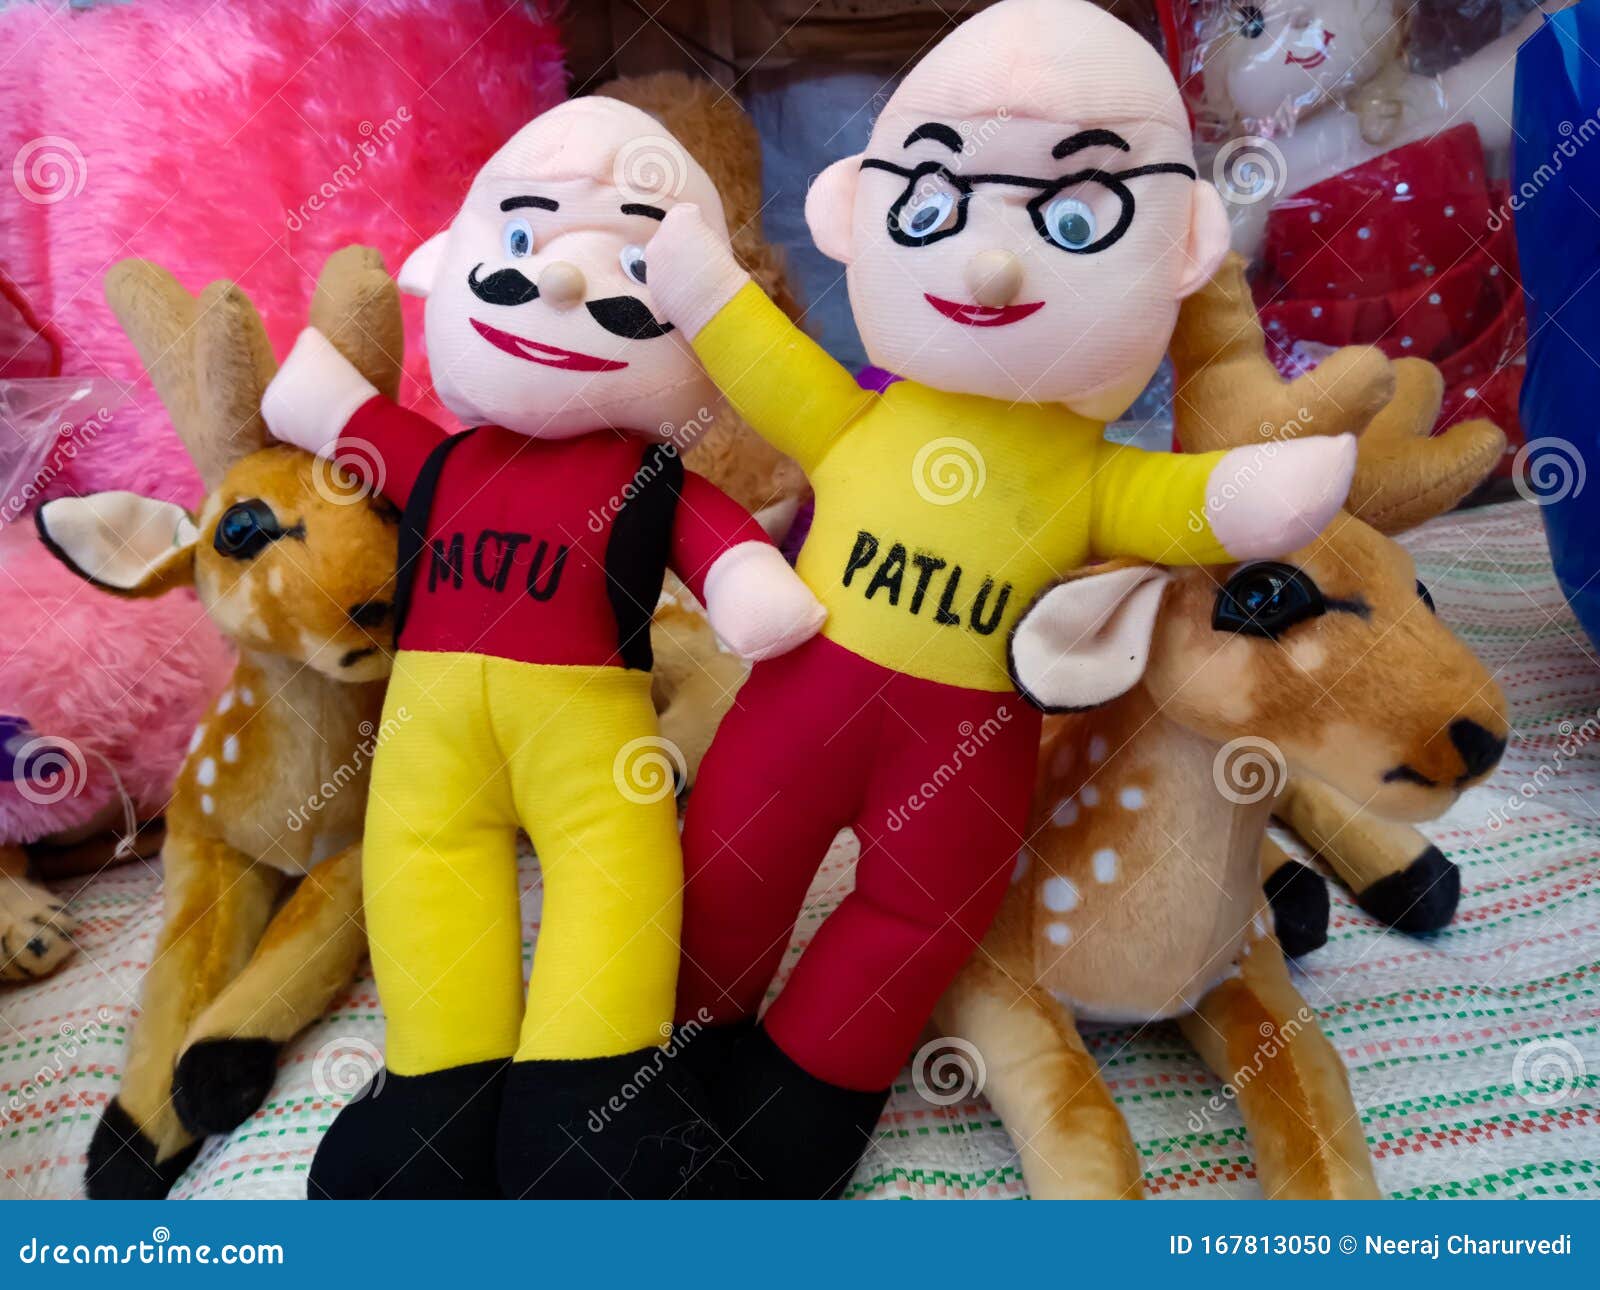 Motu Patlu Indian Cartoon Characters Isolated on Toy Shop with Dears  Editorial Image - Image of dead, eyes: 167813050